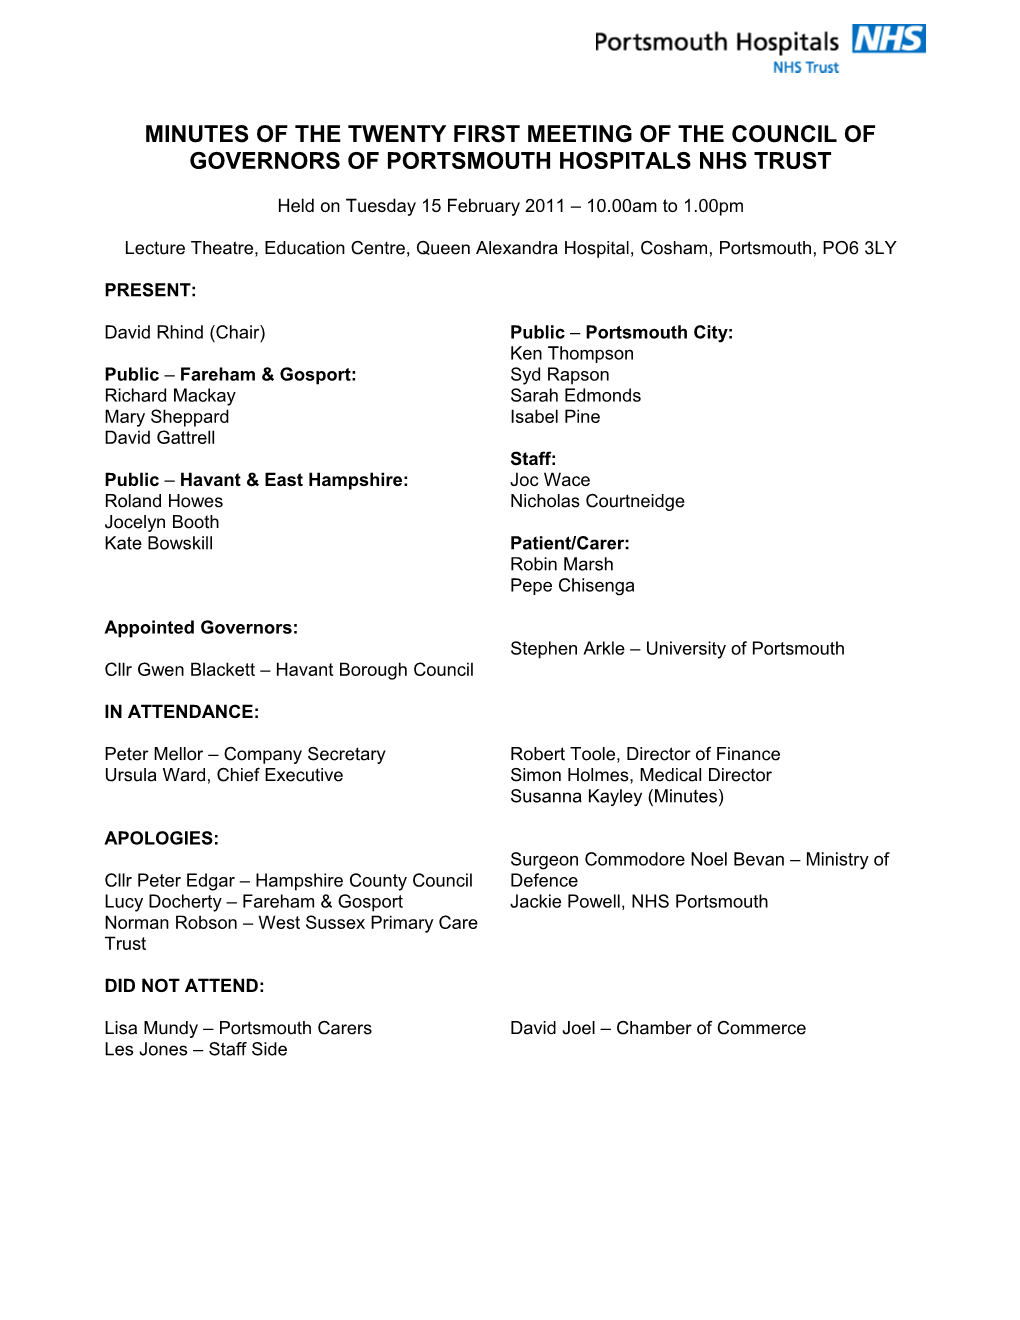 Minutes of the Twenty First Meeting of the Council of Governors of Portsmouth Hospitals